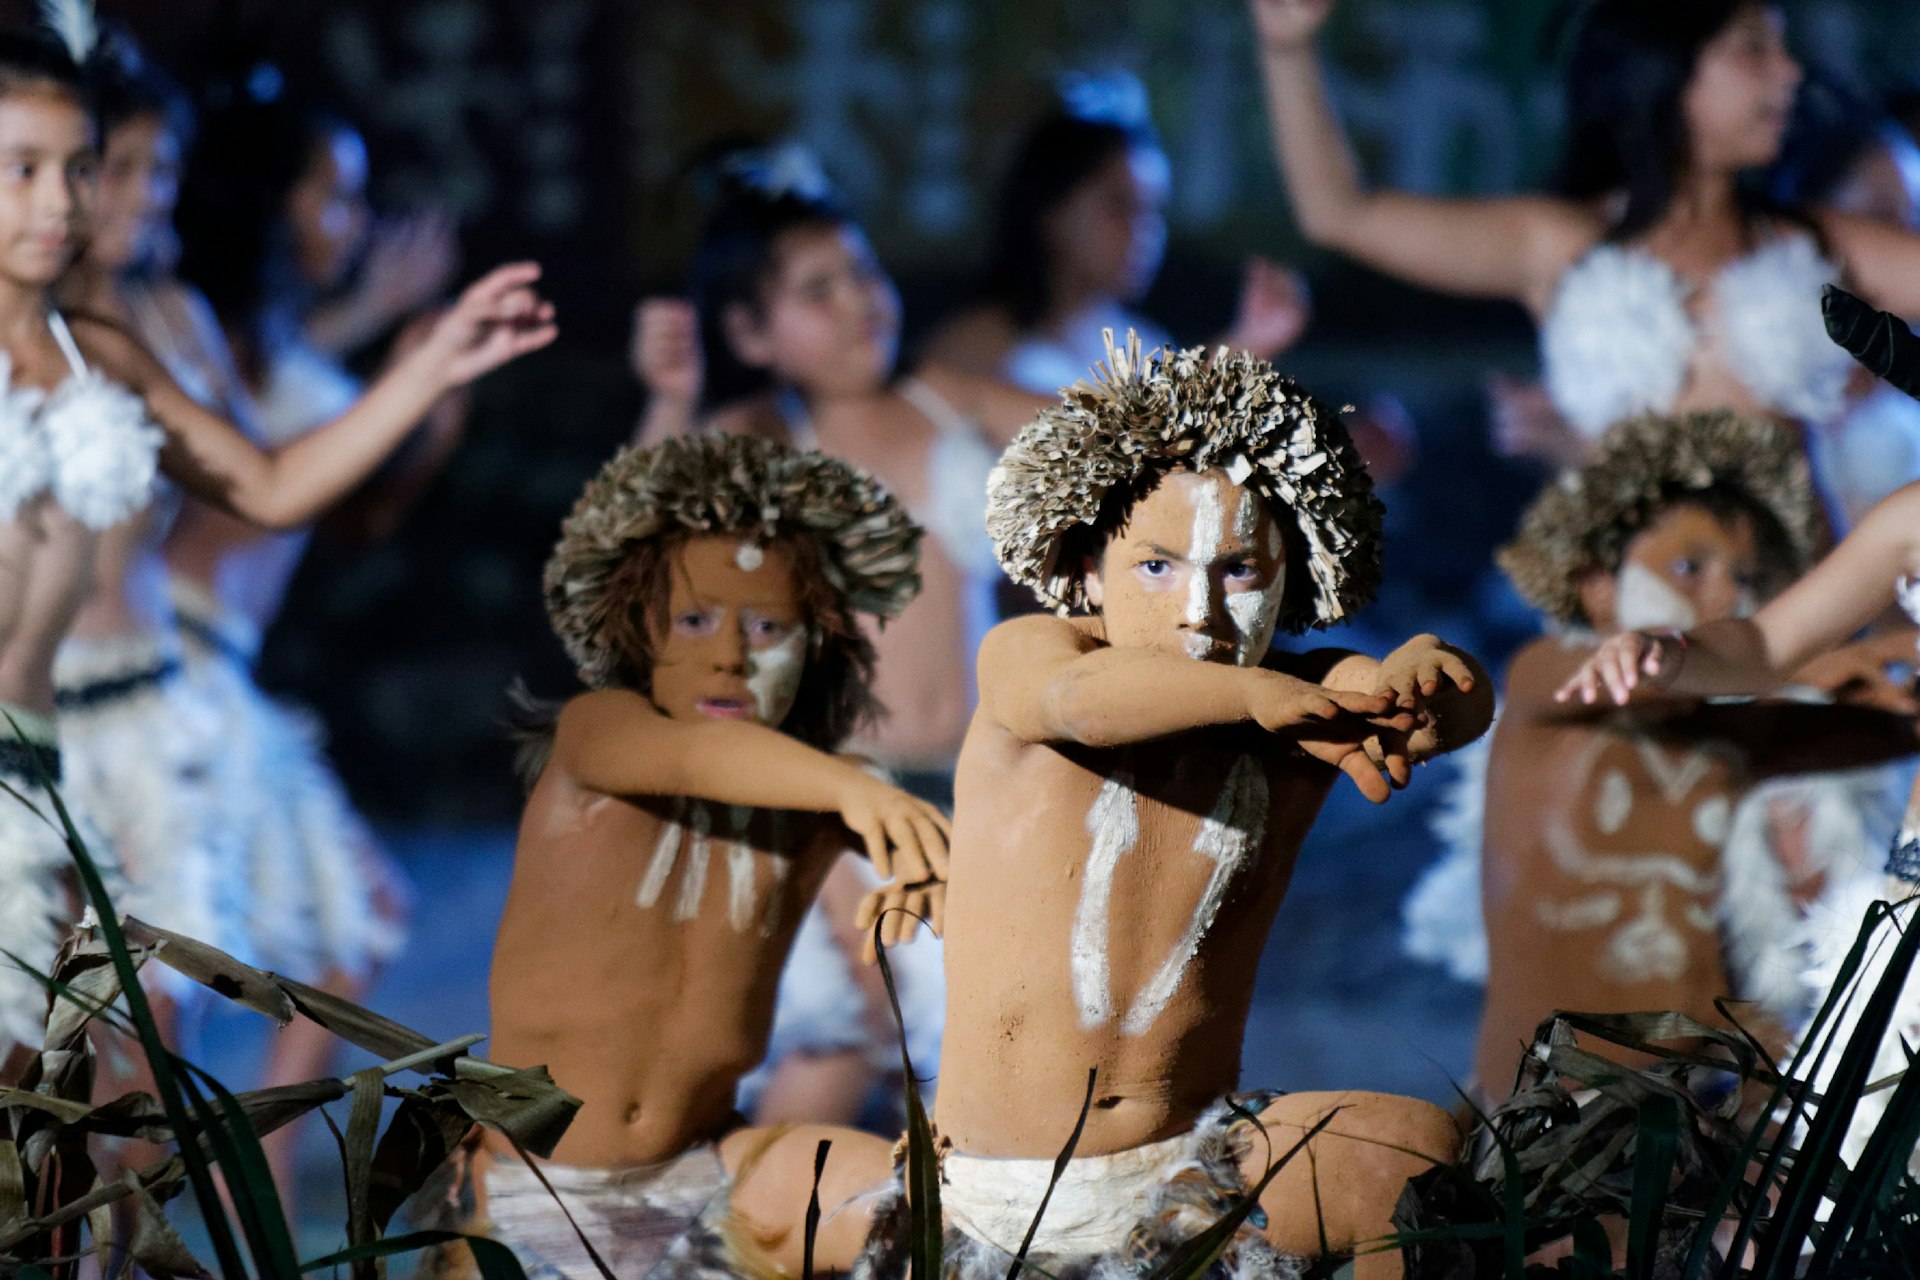 Youth perform a traditional Rapa Nui dance during the Tapati Festival © Jean-Bernard Carillet / Lonely Planet